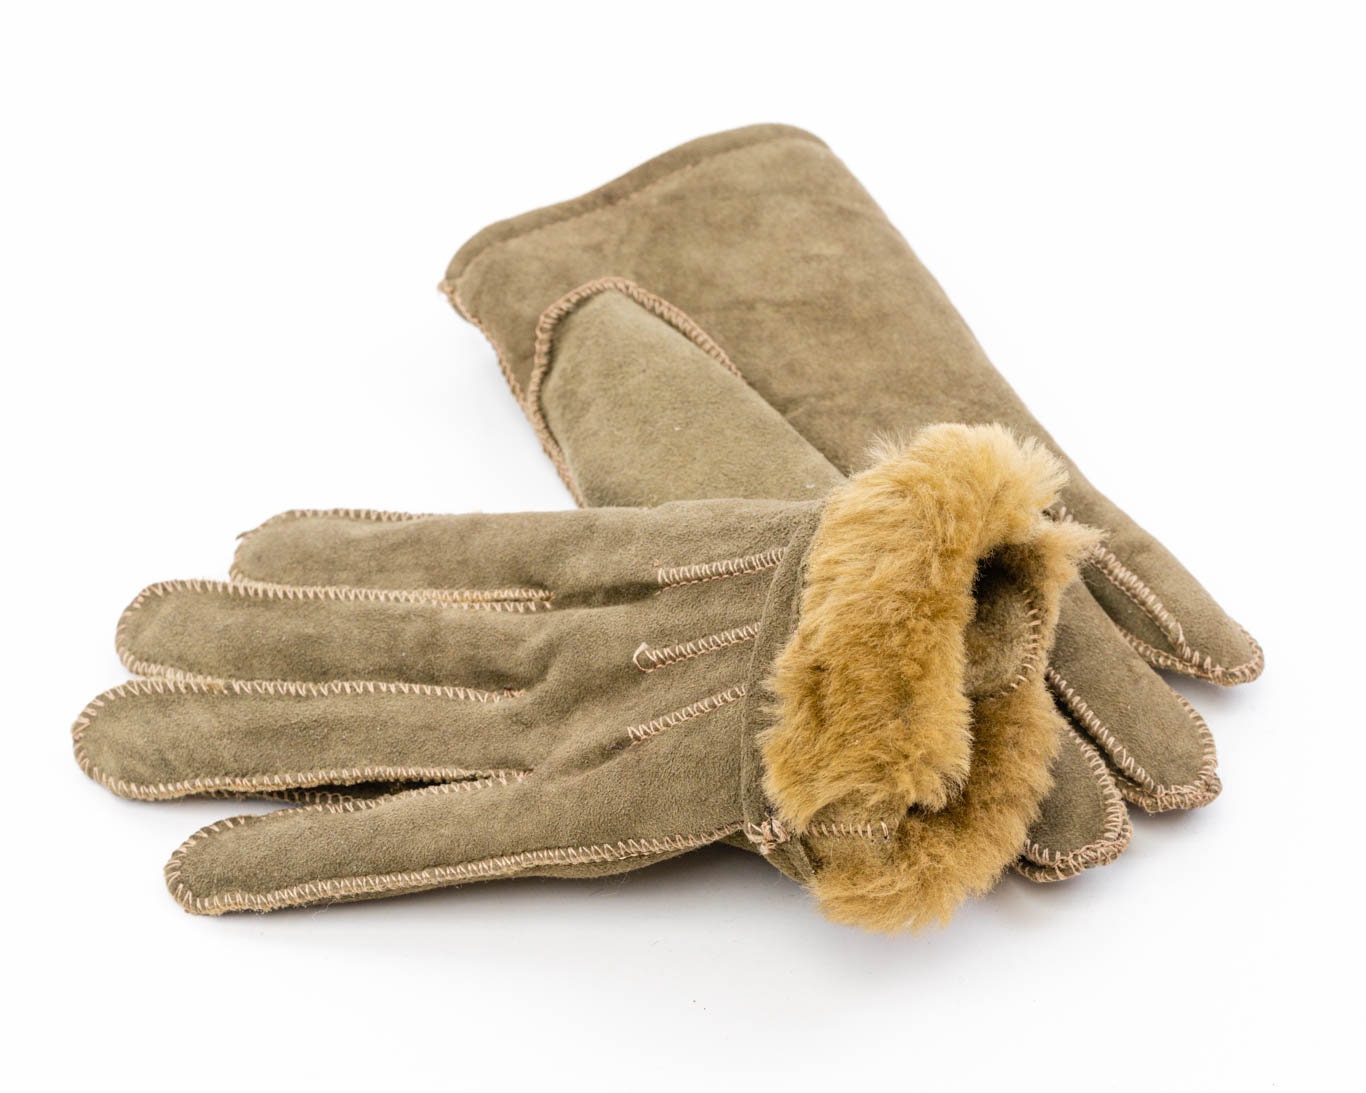 Classic Smooth Leather Mittens Touch Screen Glove Letter Sheepskin Mitten  Women Warm Winter Gloves With Box From Bapefashiongift, $49.57